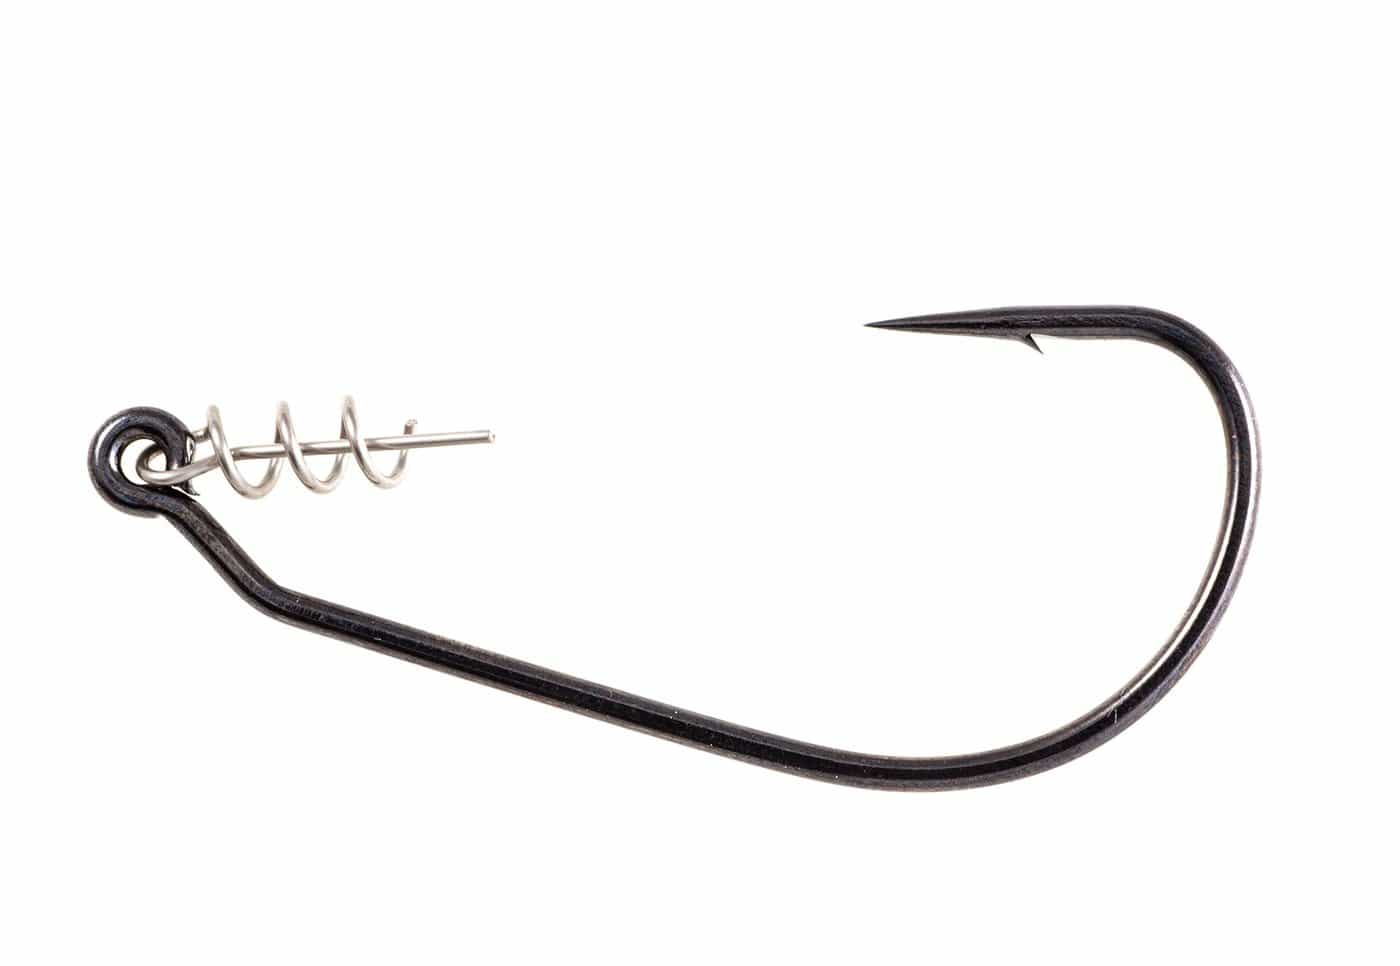 Owner Inline Single Replacement Hooks 1X-Strong - The Saltwater Edge